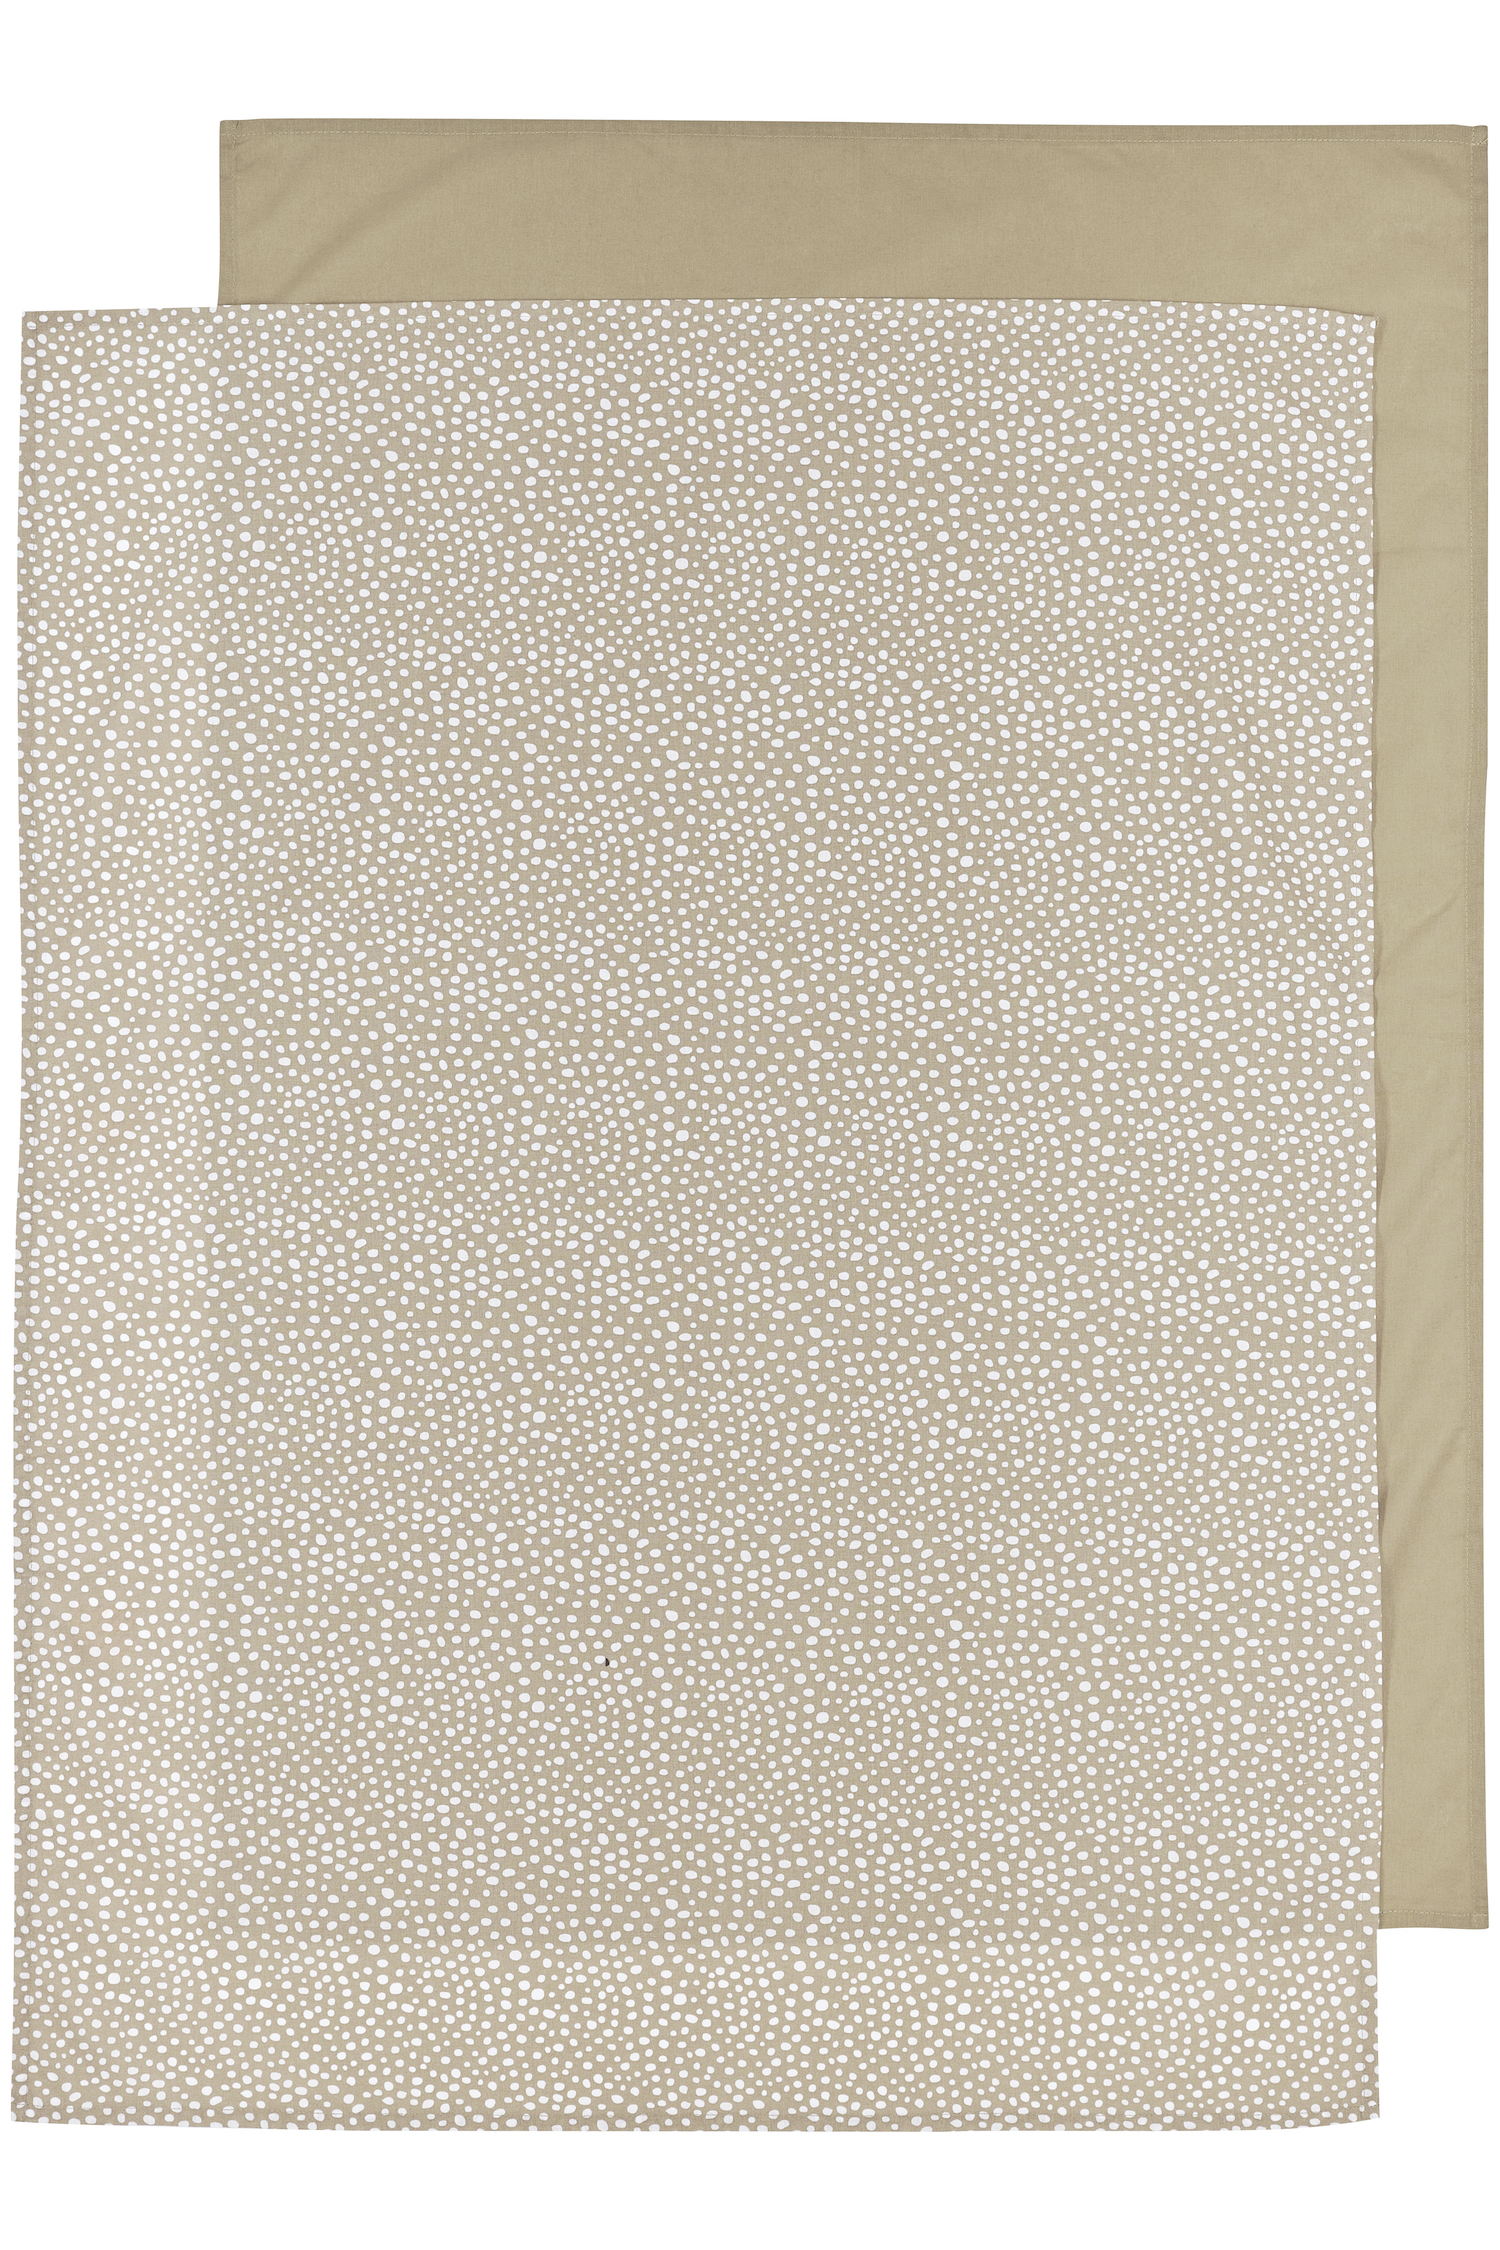 Cot Bed Sheet 2-Pack Cheetah/Uni - Taupe - 100X150cm